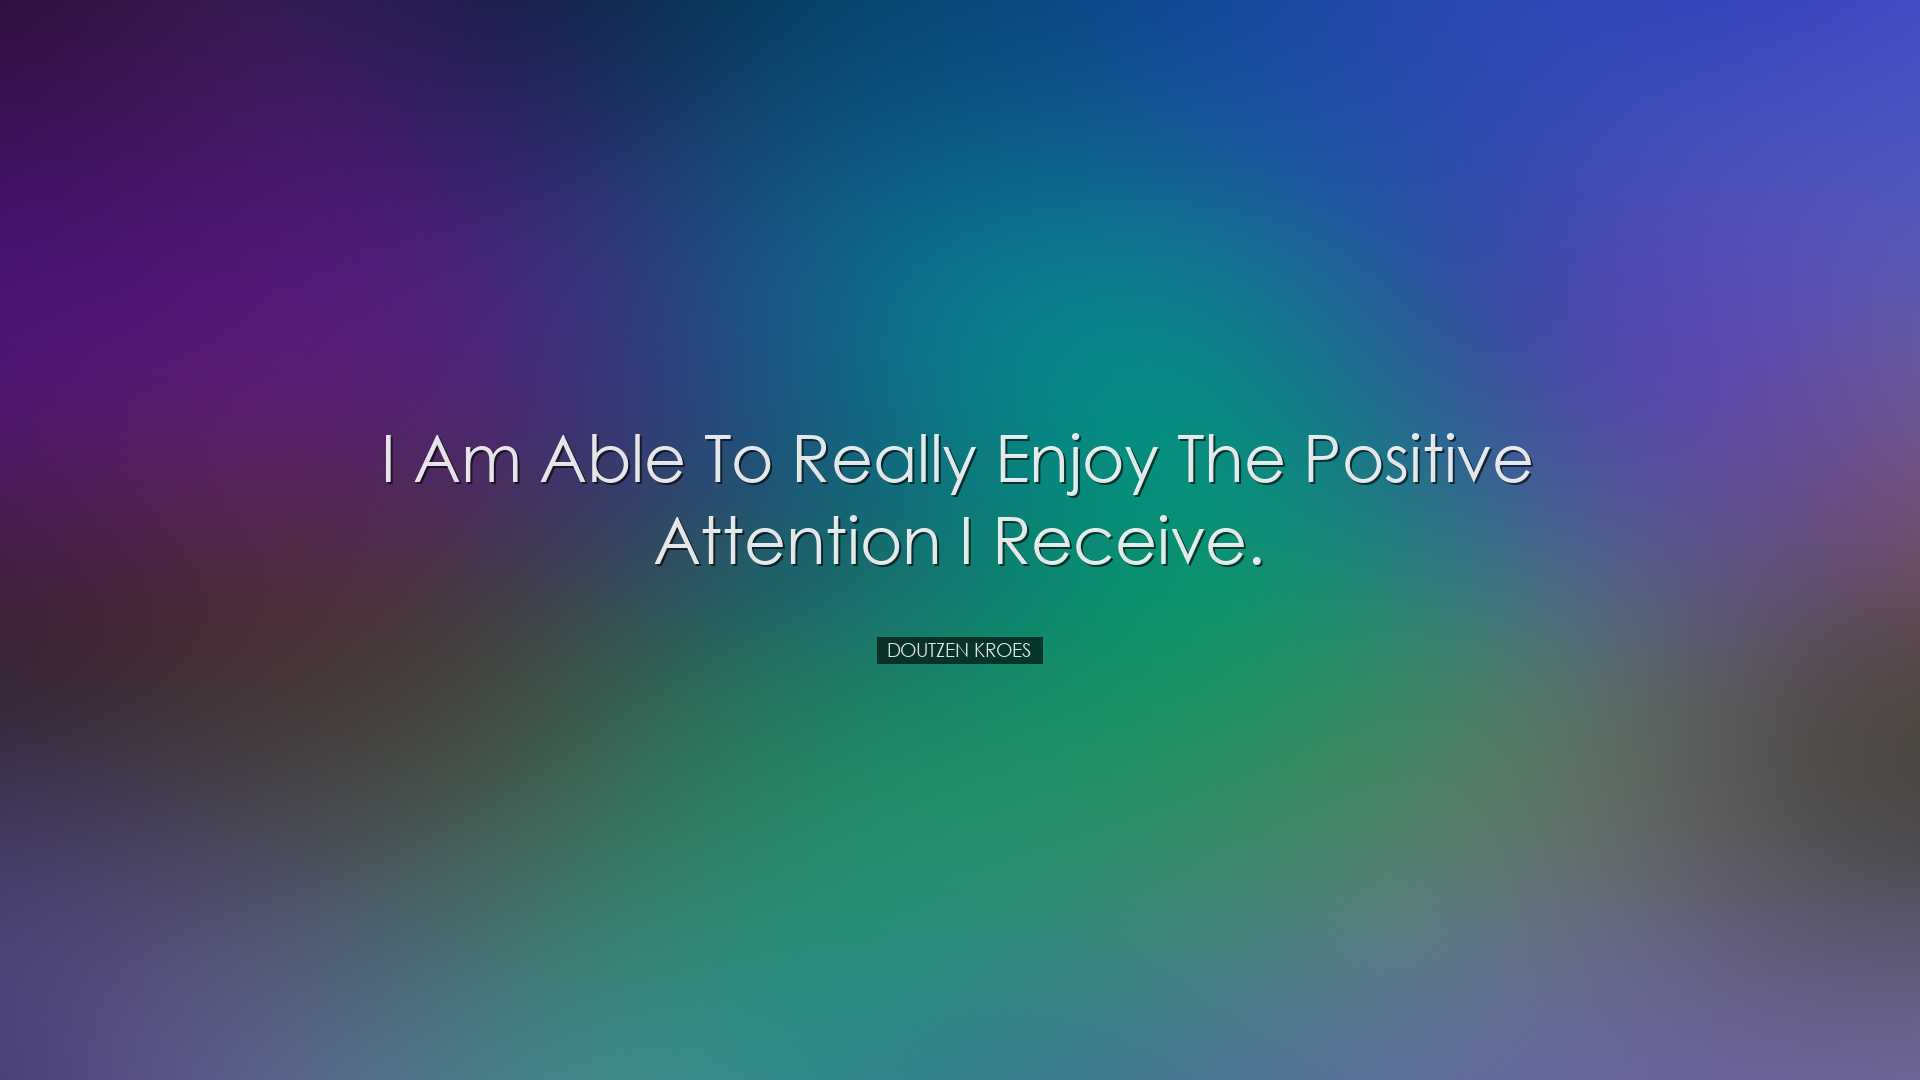 I am able to really enjoy the positive attention I receive. - Dout